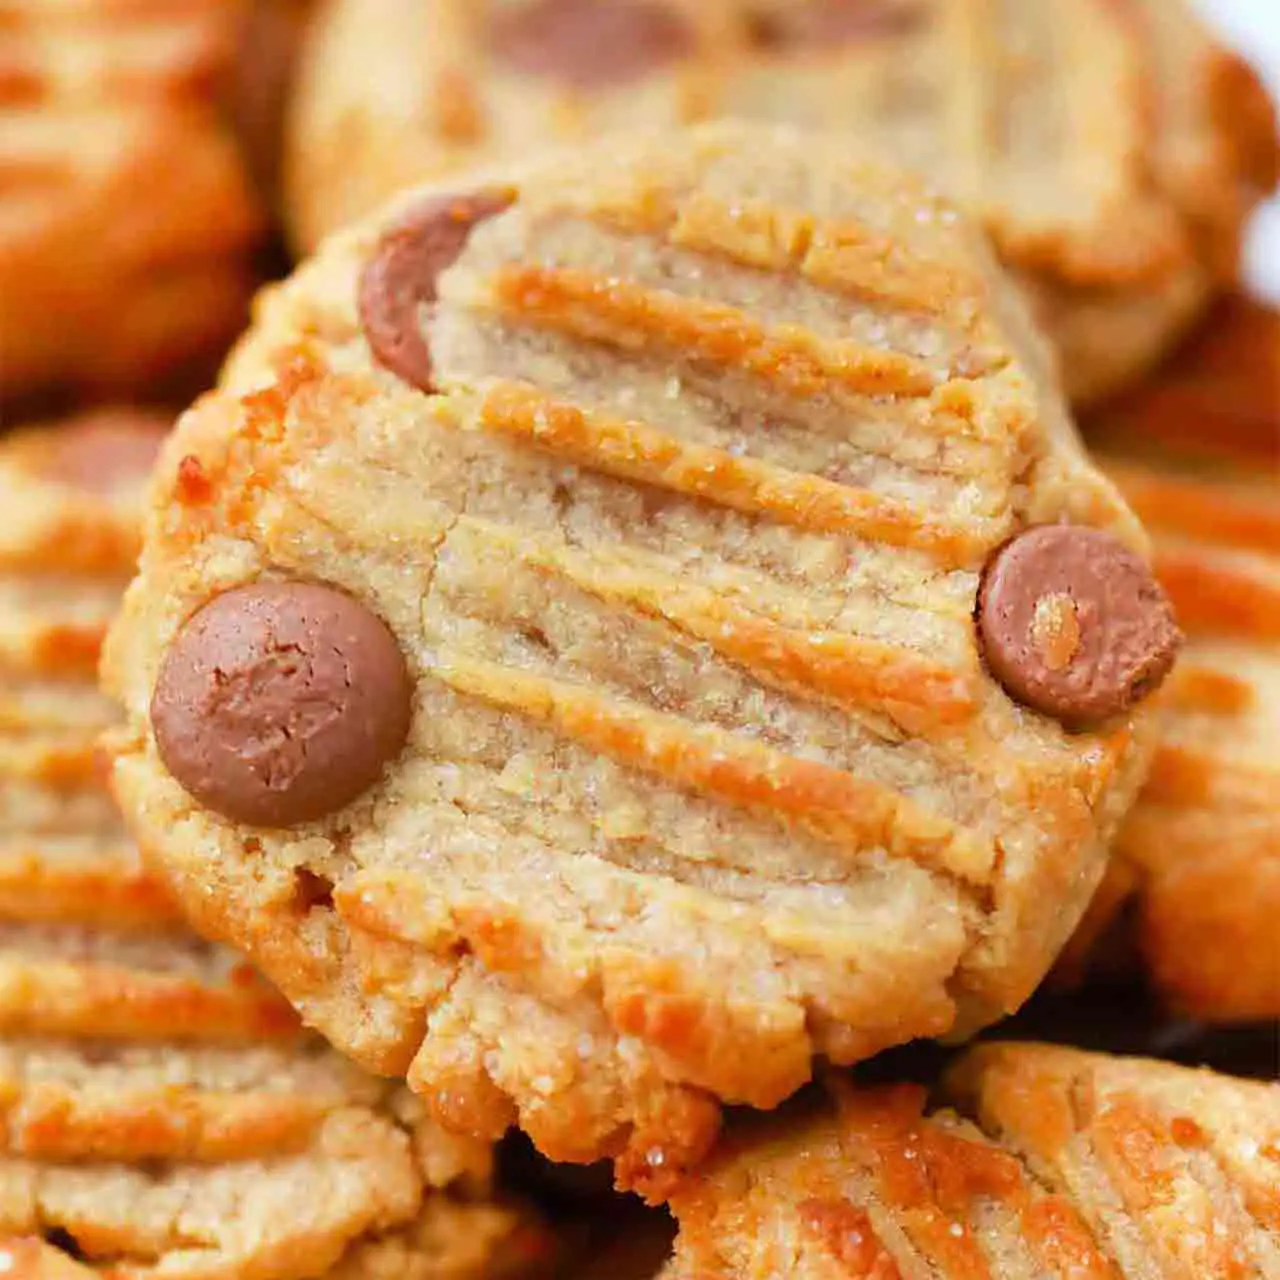 Easy Bake Oven peanut butter cookies Recipe 